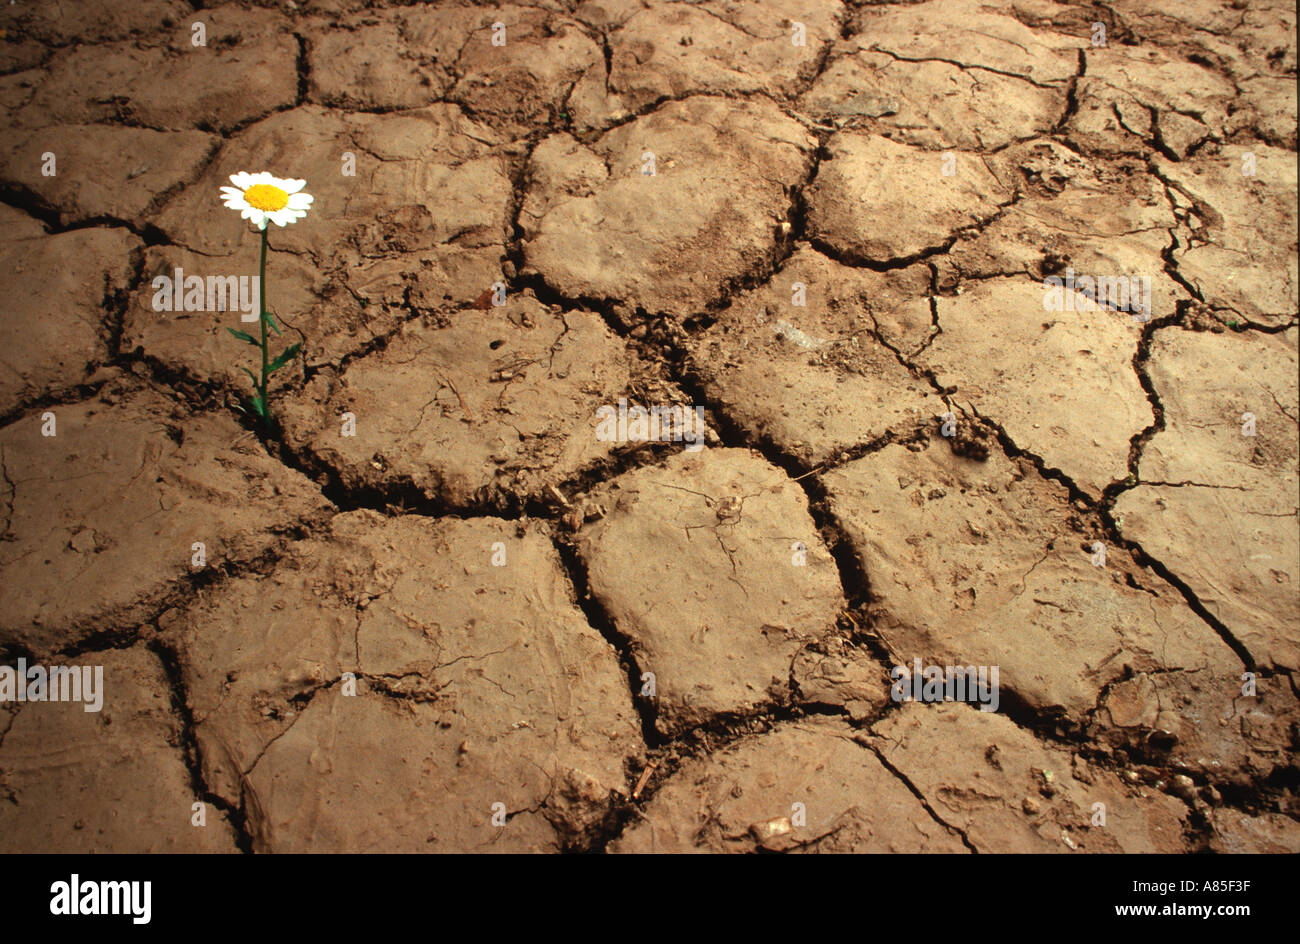 A flower grows in cracked earth during a drought Stock Photo